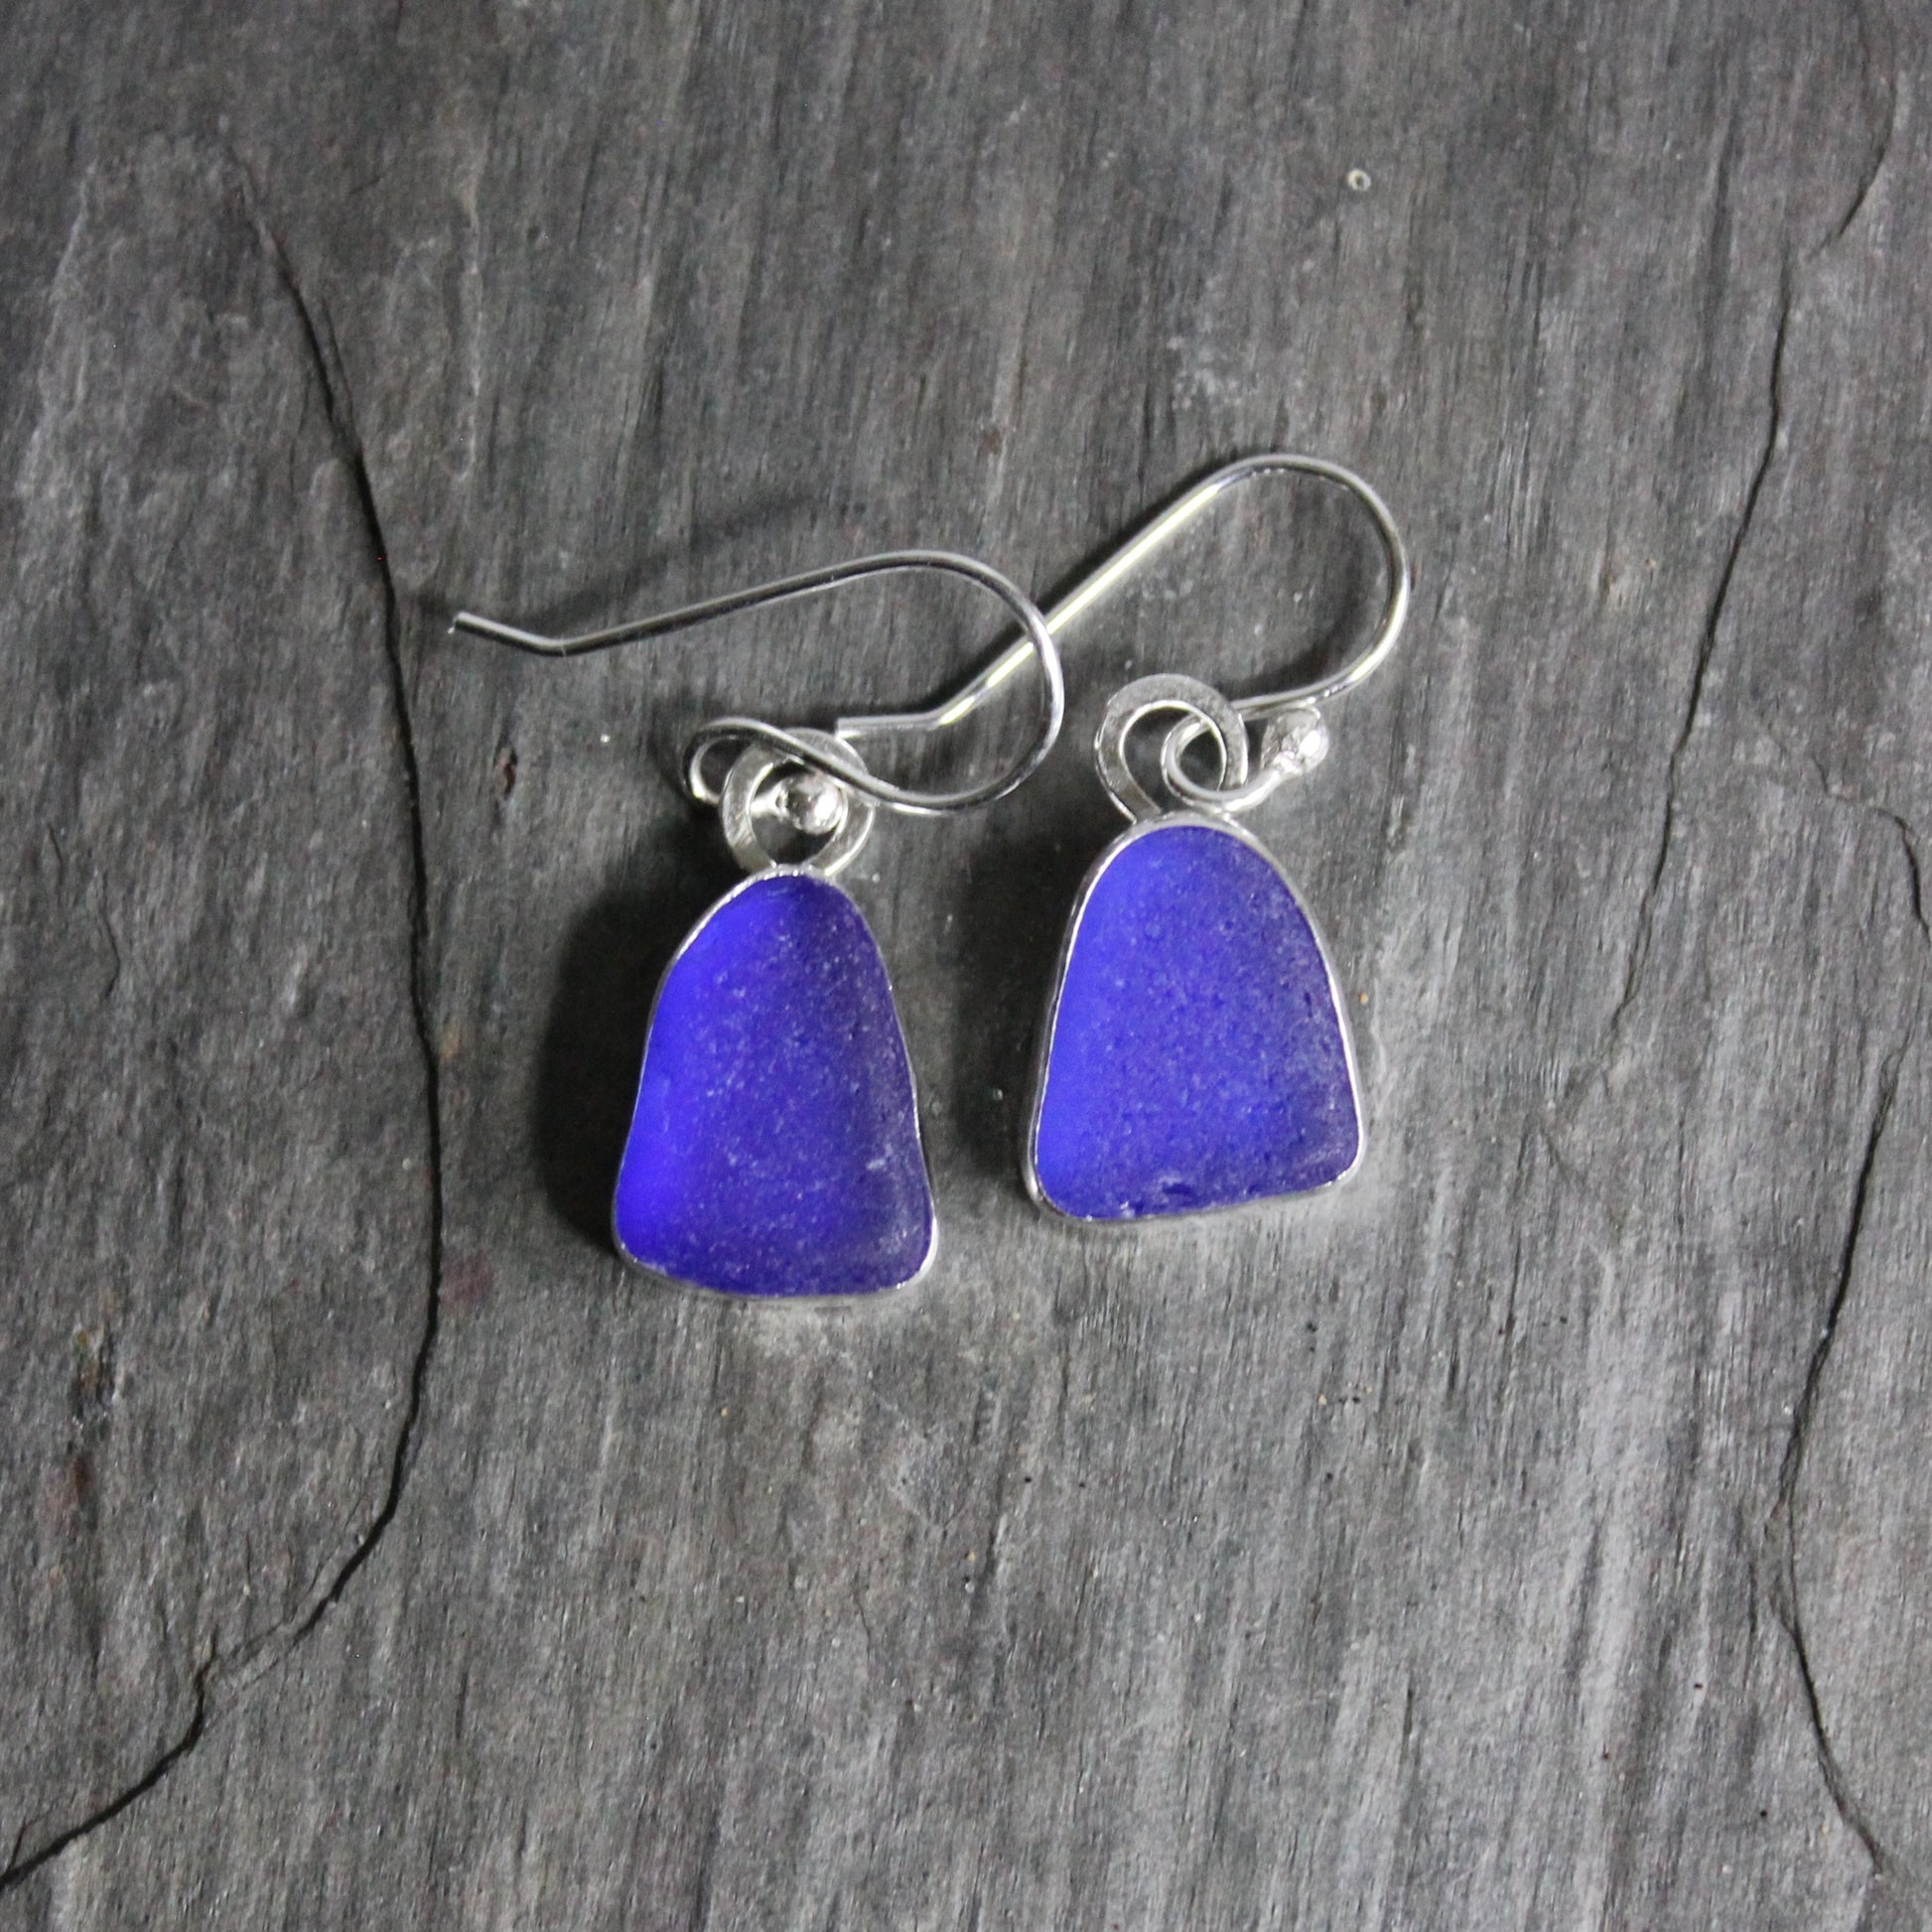 These are small dangly cobalt blue sea glass earrings that are set in a fine and sterling silver bezel setting on silver ear wires. 